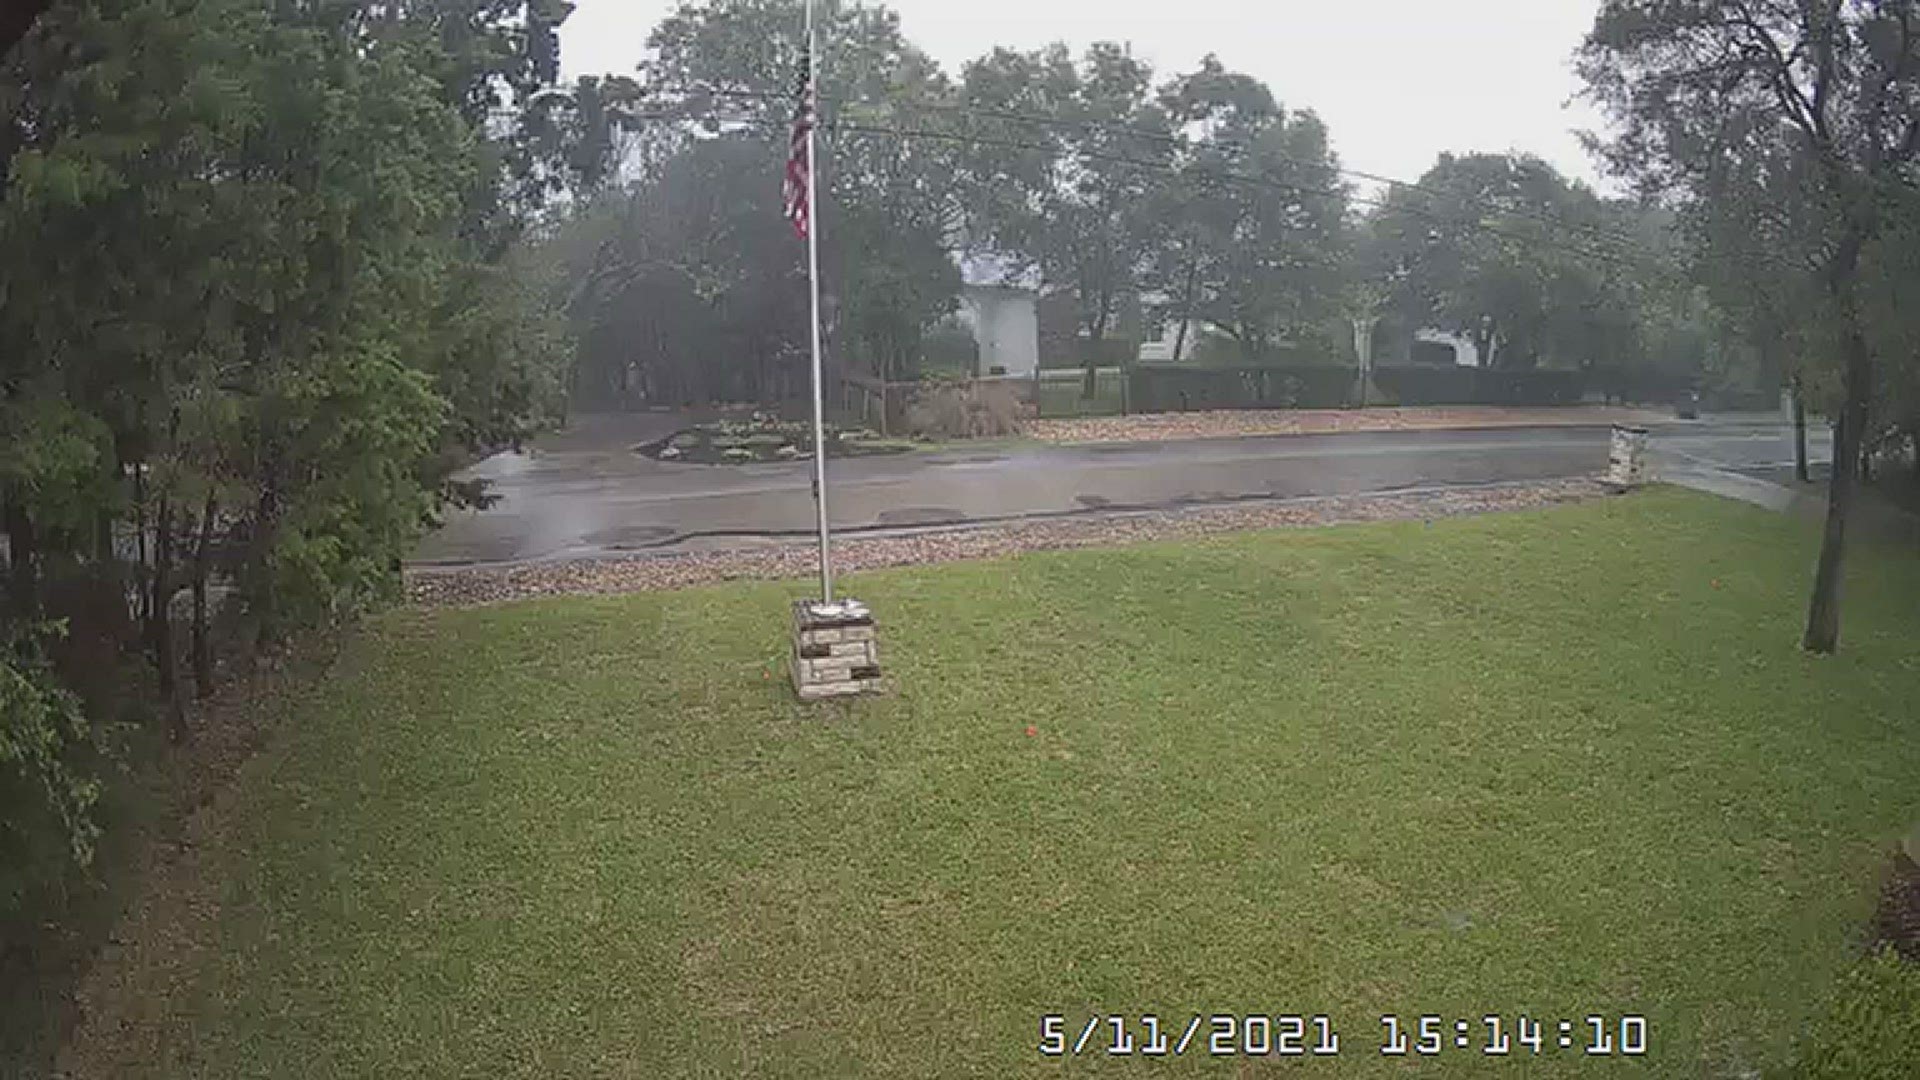 6 News viewer Joseph Anthony sent us this video his security camera caught earlier this afternoon as storms rolled through the area.